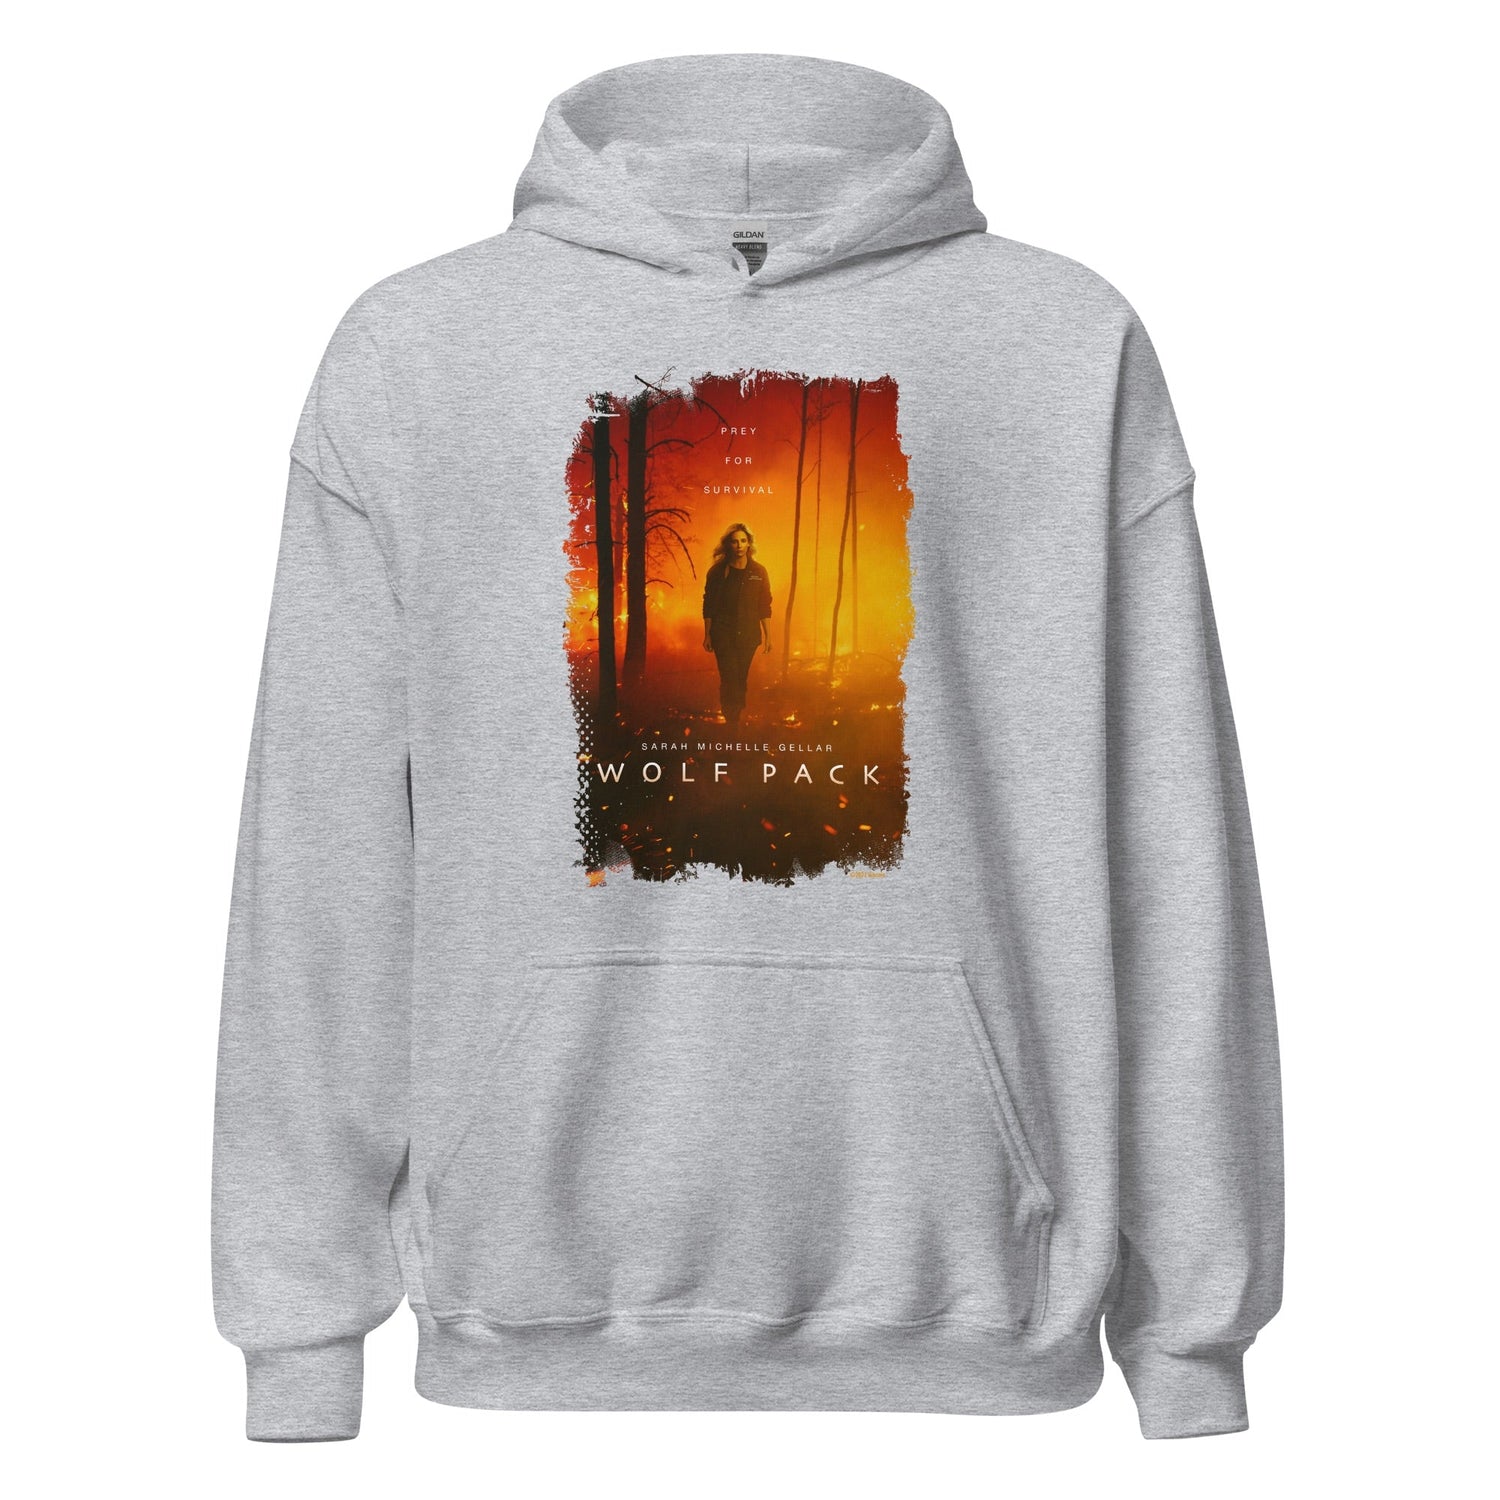 Wolf Pack Prey For Survival Adult Hooded Sweatshirt - Paramount Shop